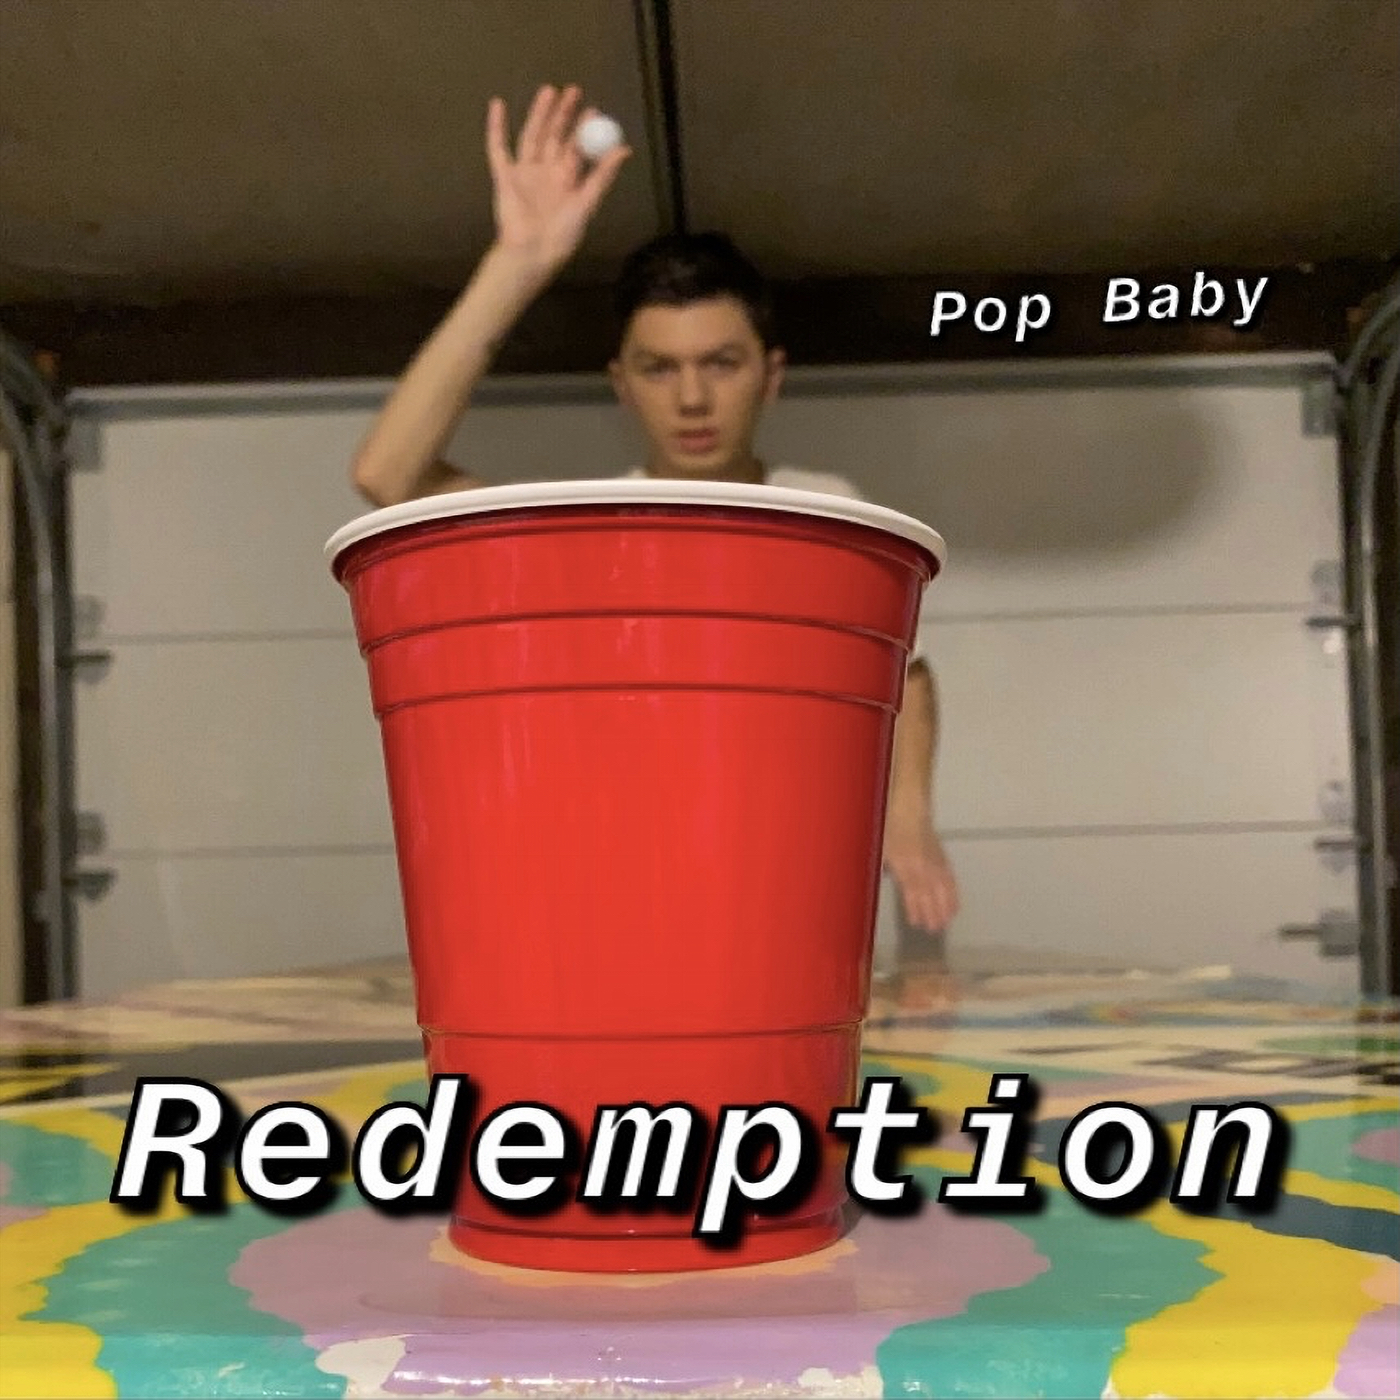 Keeping his audiences engaged, ‘Pop Baby’ delights fans with the release of his full-length album ‘Redemption’.